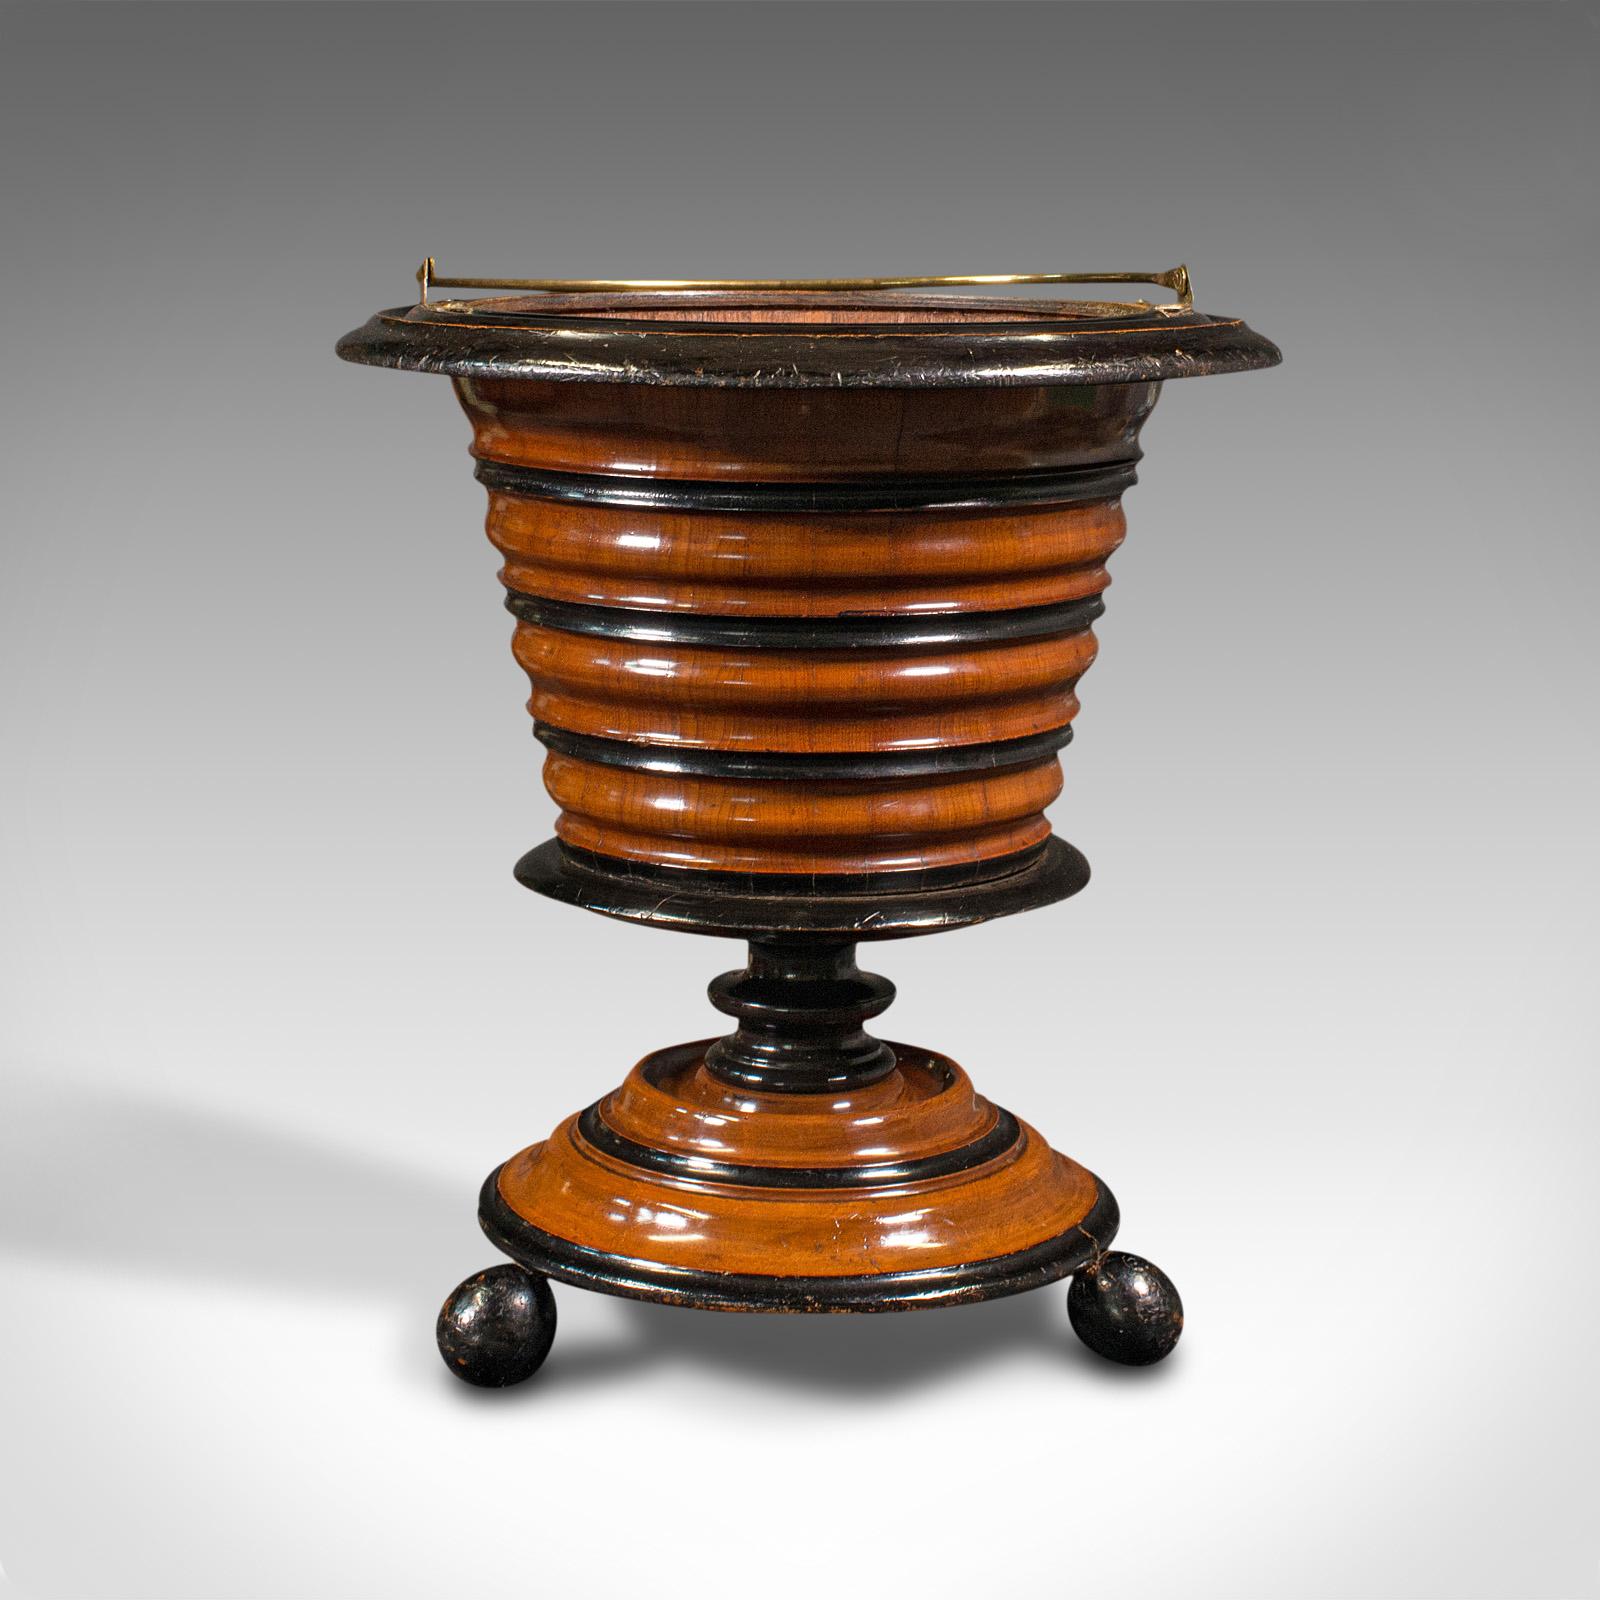 This is an antique fireside store. A Dutch, walnut decorative jardiniere or log bin, dating to the late Victorian period, circa 1900.

Captivating form and colour - a treat for the fireside
Displays a desirable aged patina throughout
Select